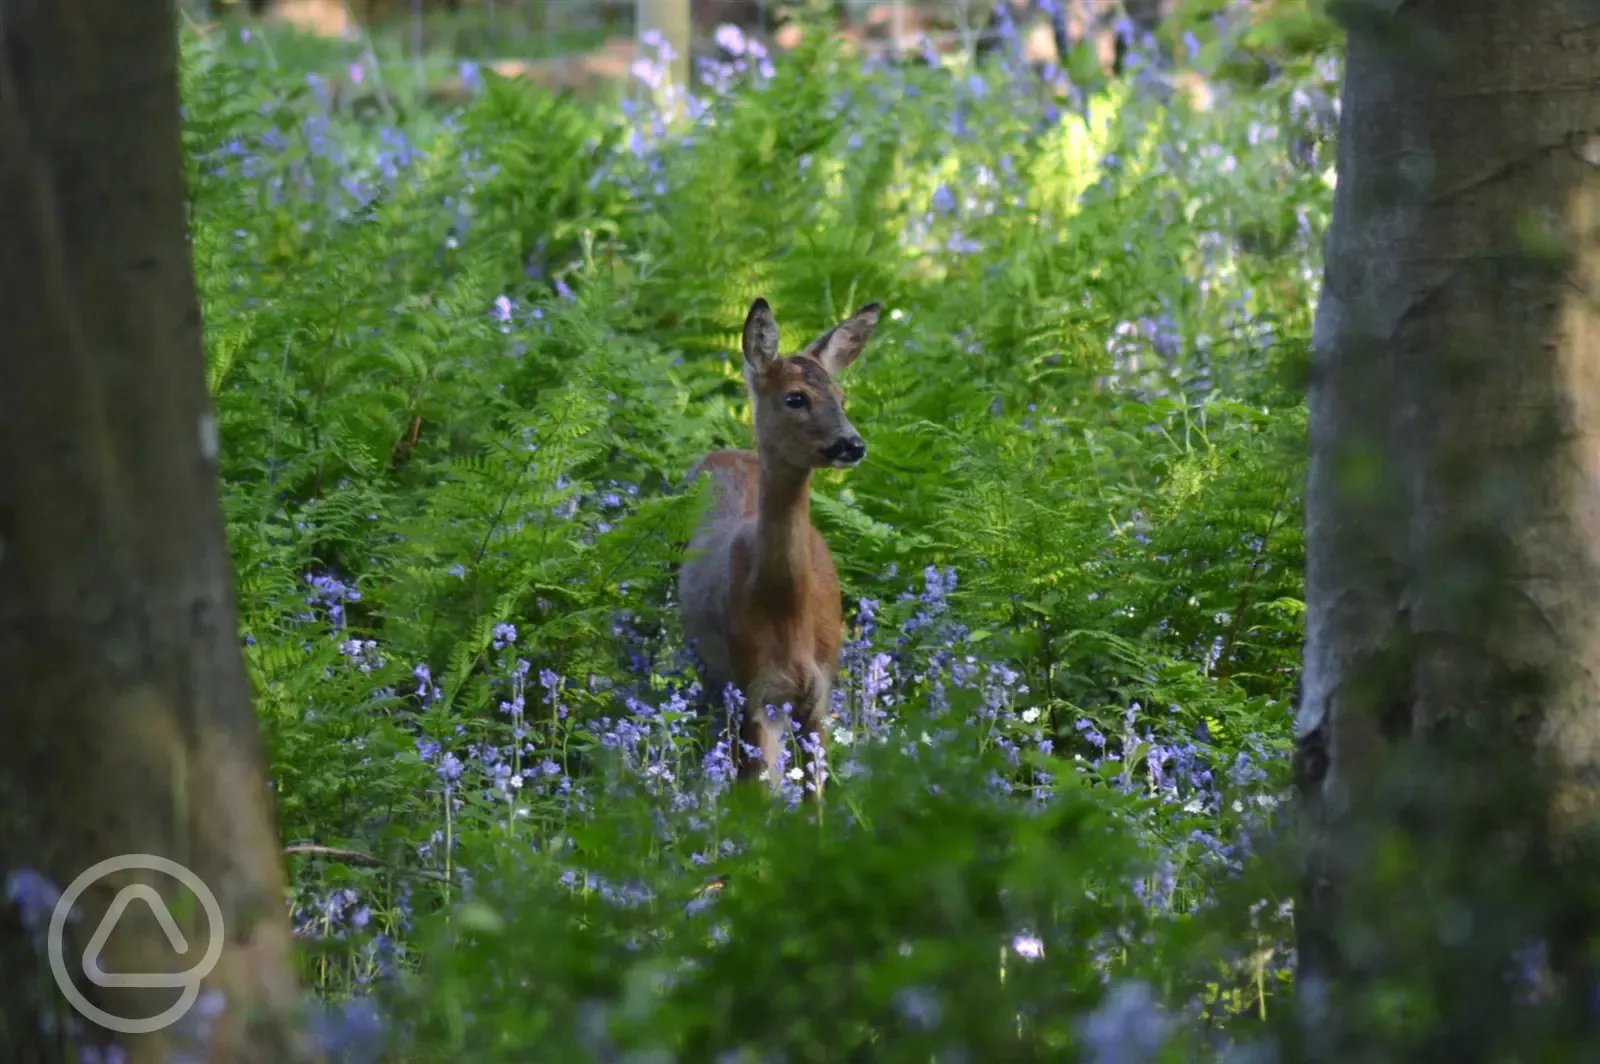 A fawn spotted on one of our woodland walks in the lovely bluebell woods